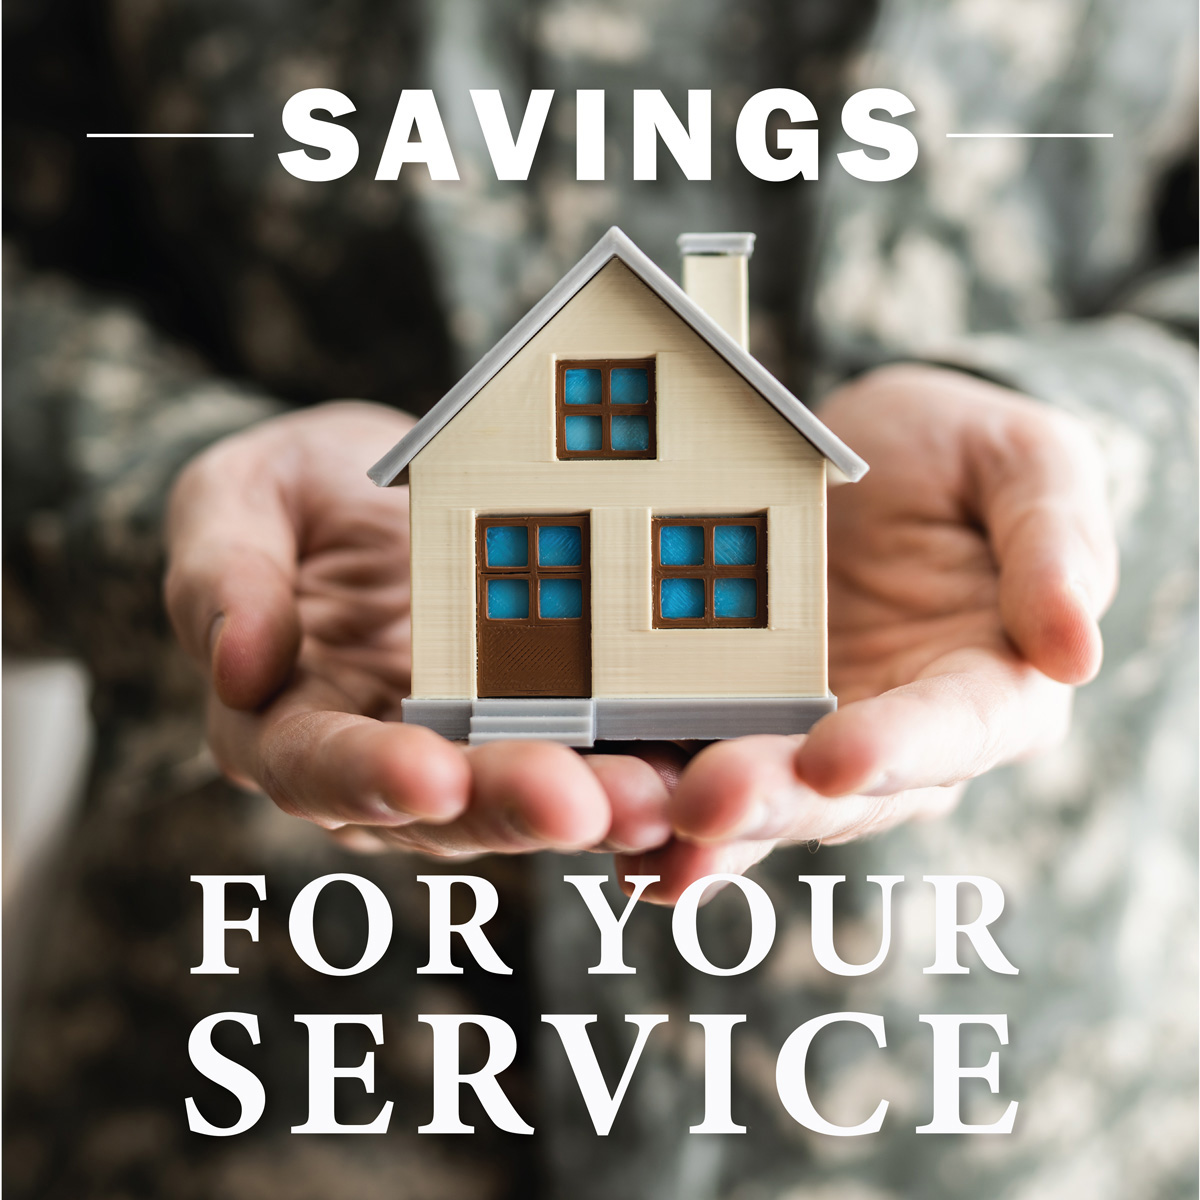 Veterans: Did you know there’s a special refinancing program just for you? A VA interest rate reduction refinance loan can be fast and easy with no down payment. Call today to find out if you’re eligible to start saving.